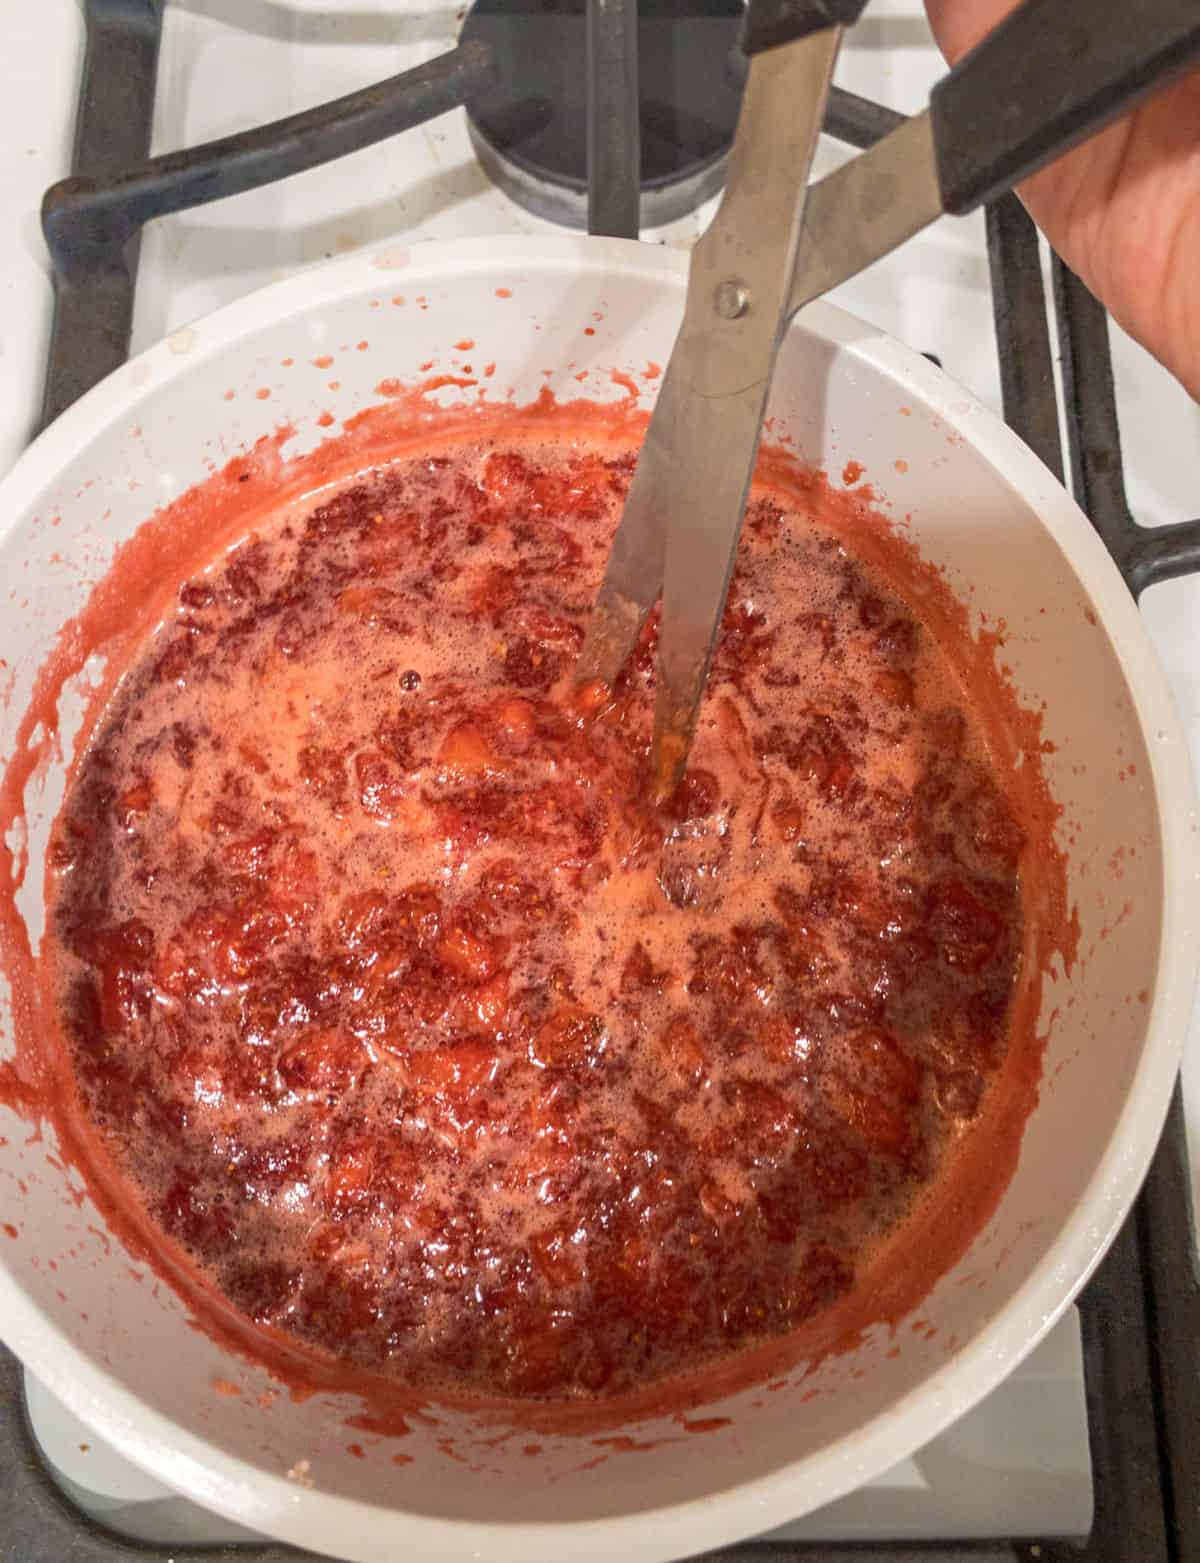 Using scissors to cut up strawberries in a saucepan.